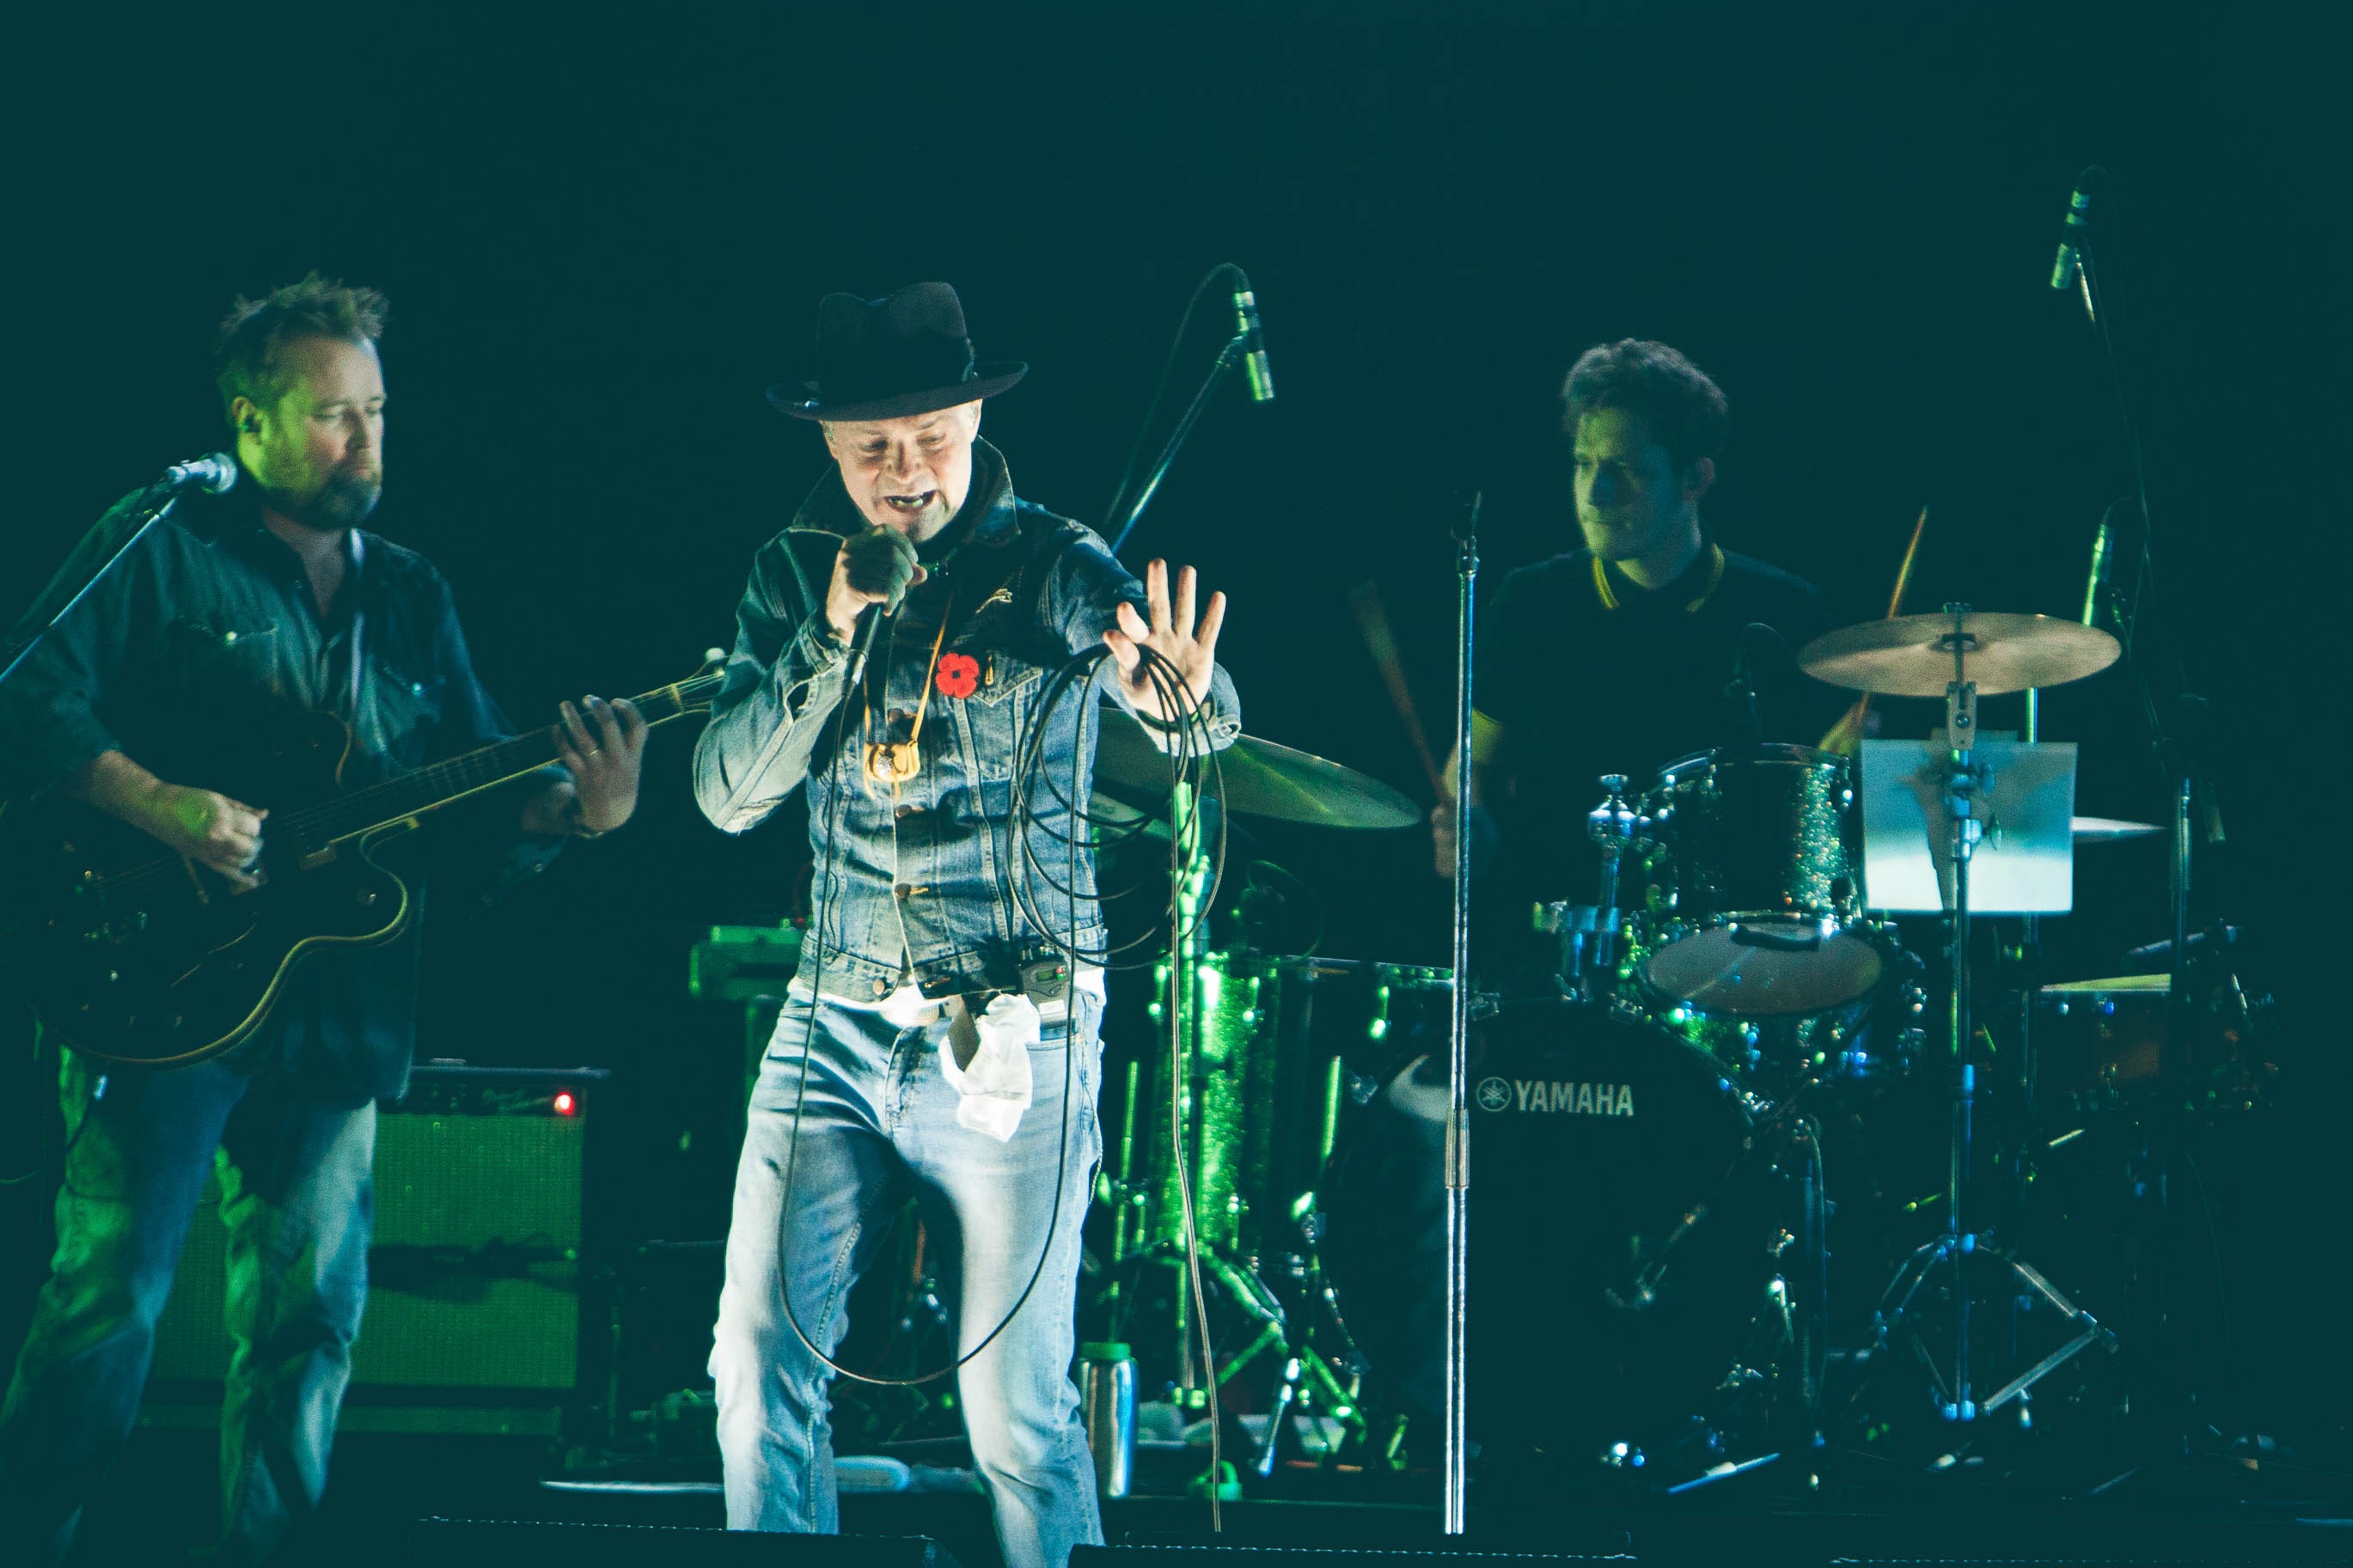 SEE IT: Photos from the Gord Downie's Secret Path concert